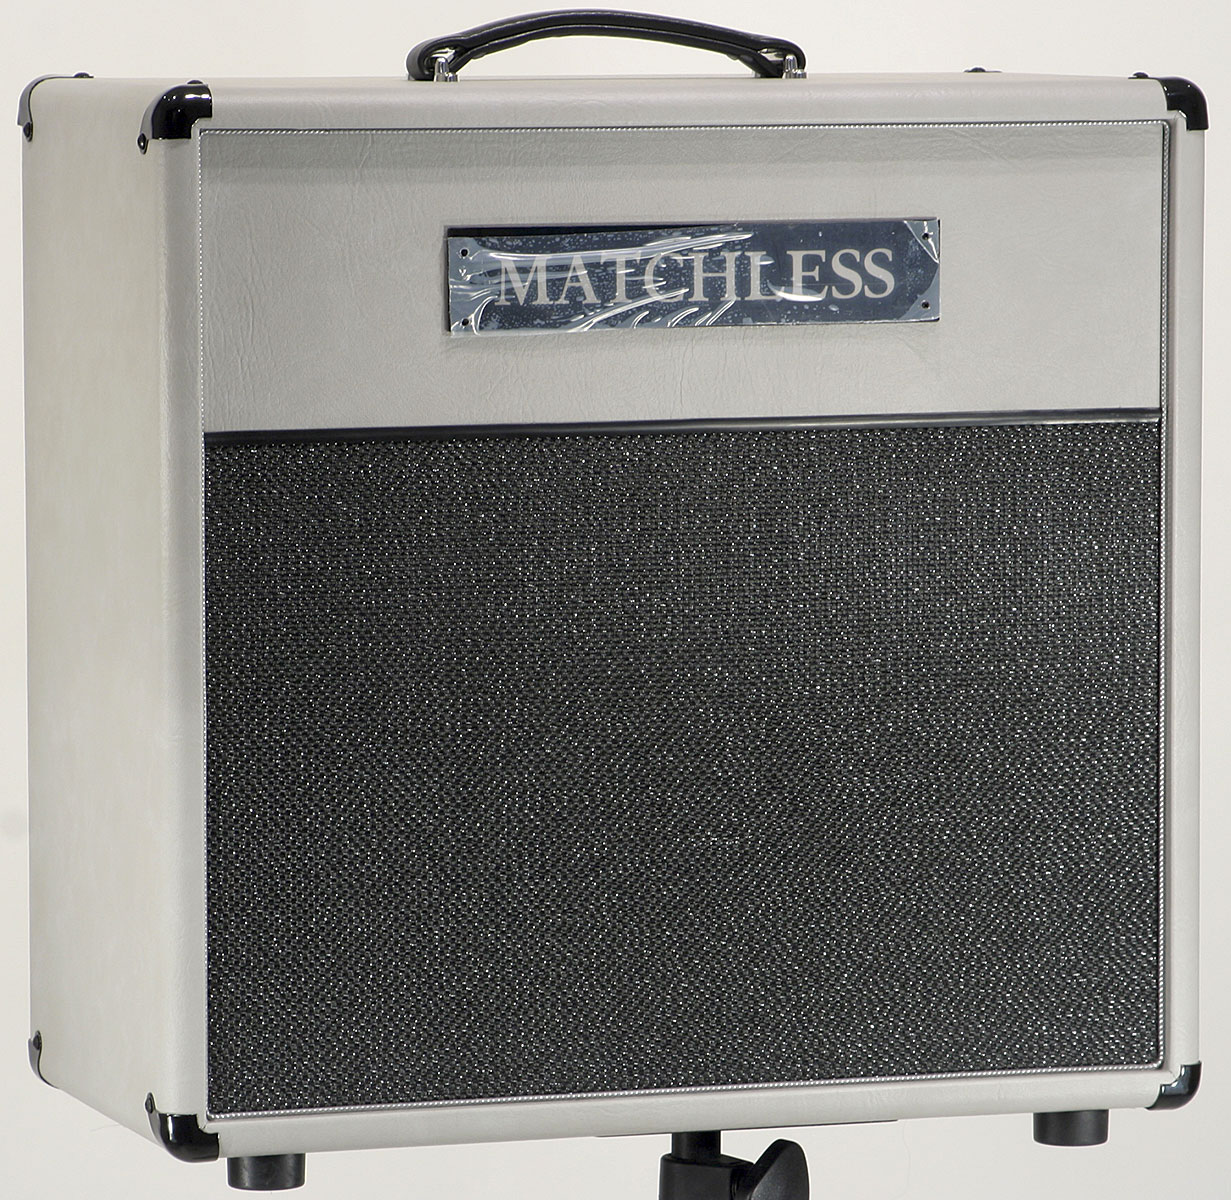 Matchless Ess 1x12 30w 8-ohms Gray/silver - Electric guitar amp cabinet - Variation 2